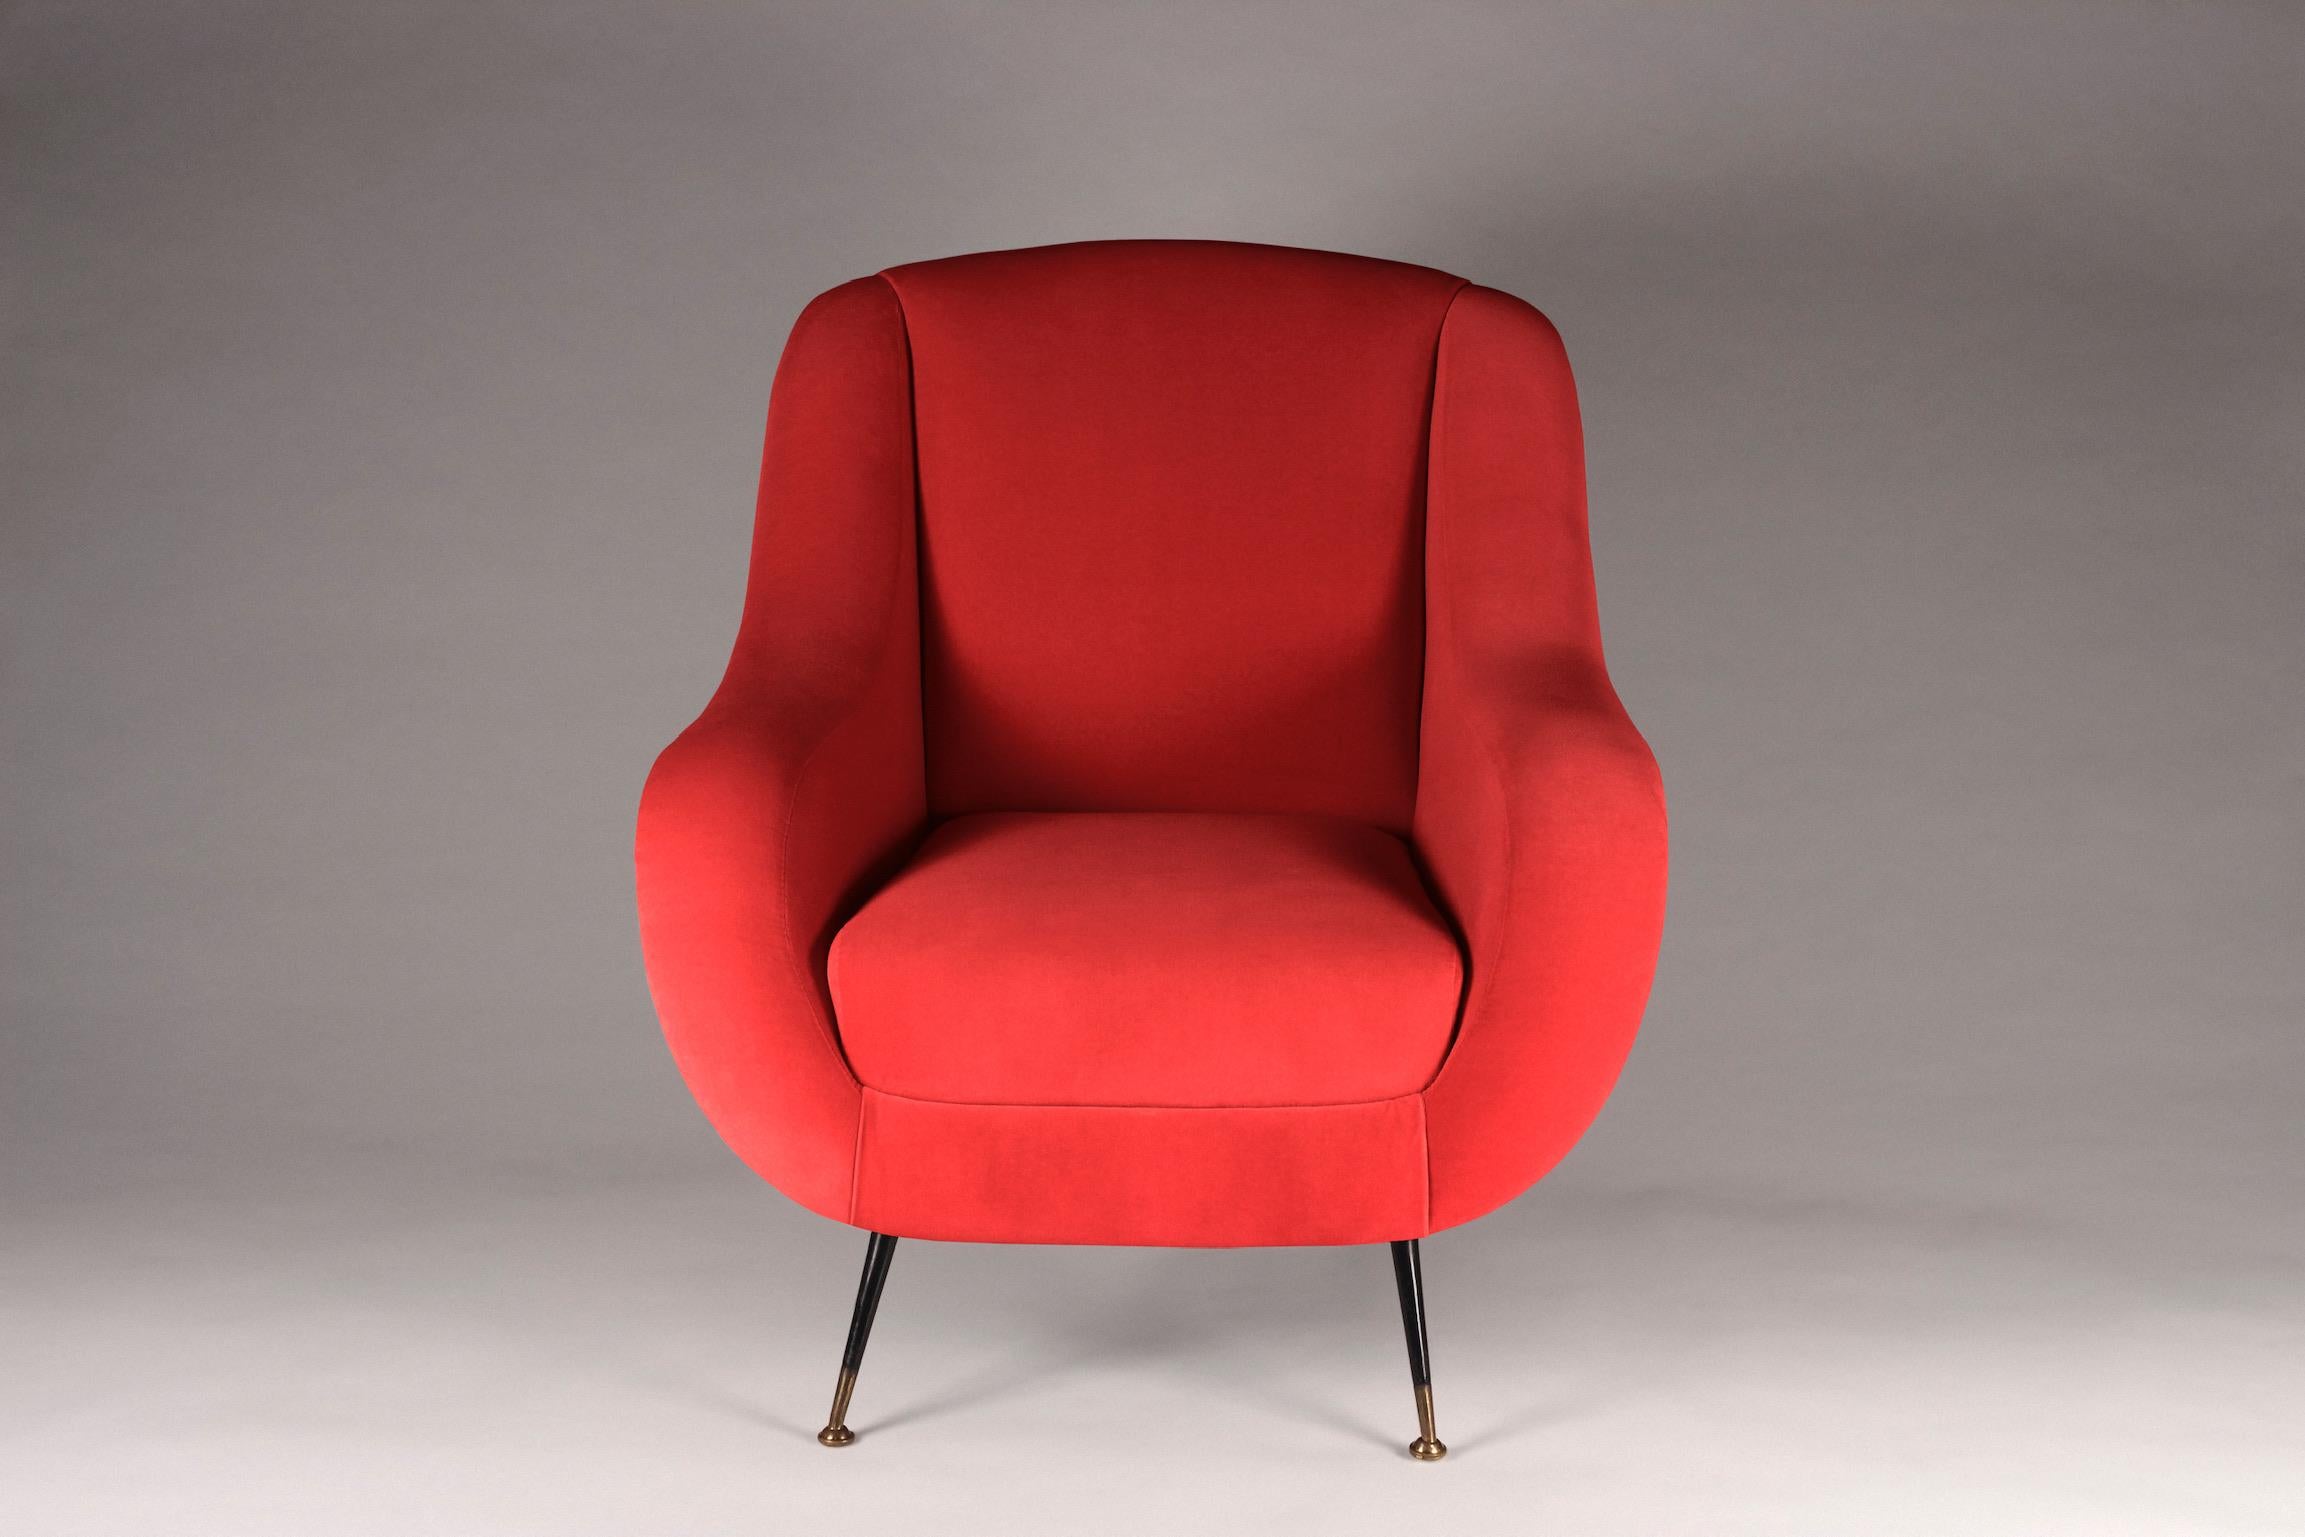 The Sophia chair was inspired by stylish Italian design from the 1950s and is now created by English craftsman for the 21st century. We developed a lounge chair with the option of producing any number to your fabric specification. The price quoted